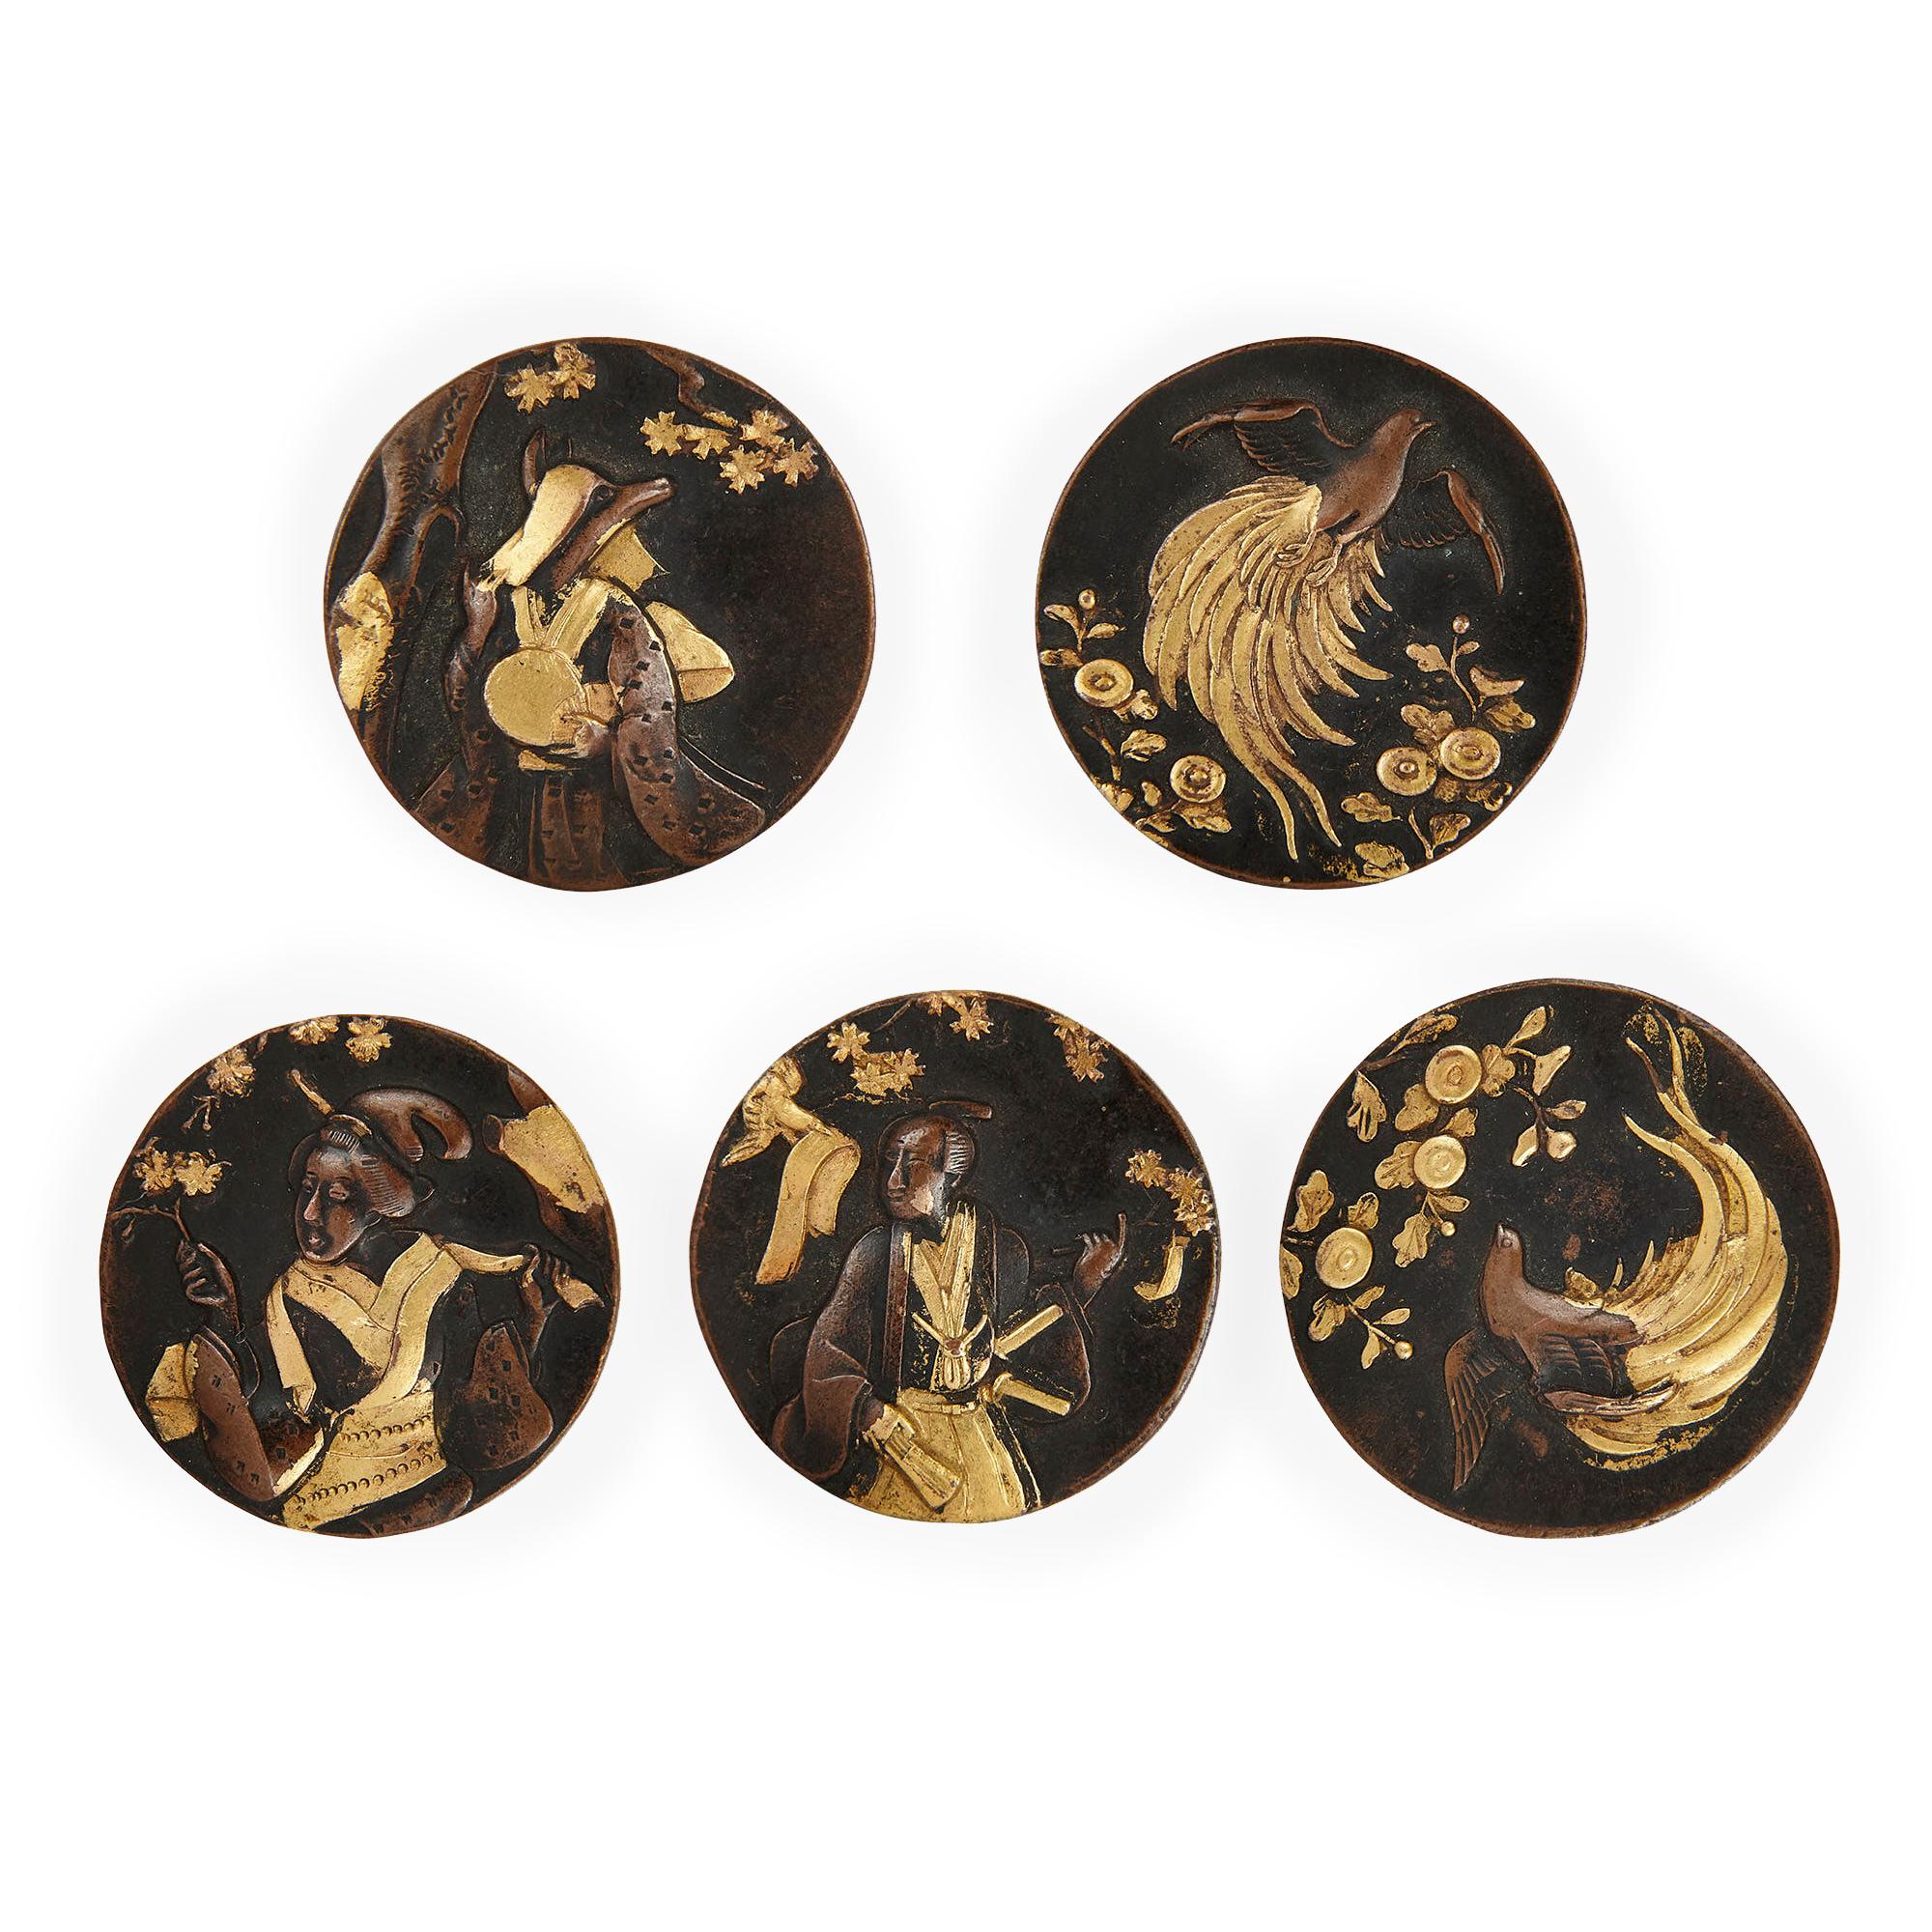 Group of fourteen Japanese Meiji period gilt metal plaques
Japanese, Late 19th Century
Height 2cm, width 2cm

These beautiful Japanese Meiji period plaques are crafted from an alloy of gold and copper that has been treated to render a black patina